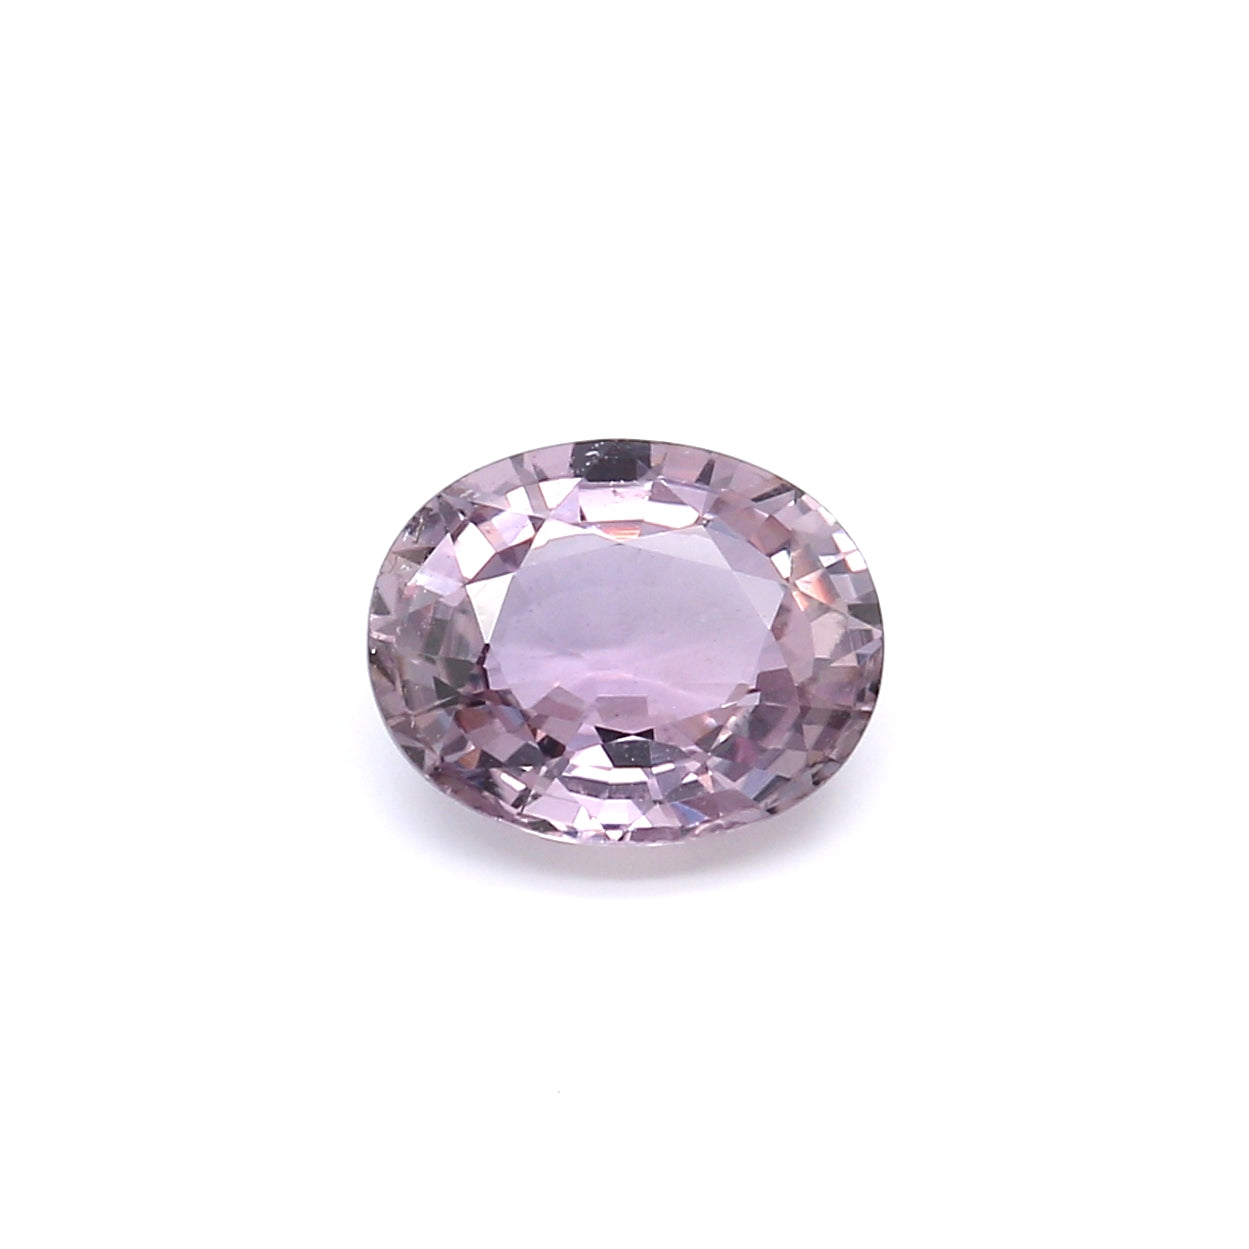 2.40ct Violetish Blue / Purple, Oval Color Change Sapphire, Heated, Madagascar - 9.07 x 7.20 x 4.08mm